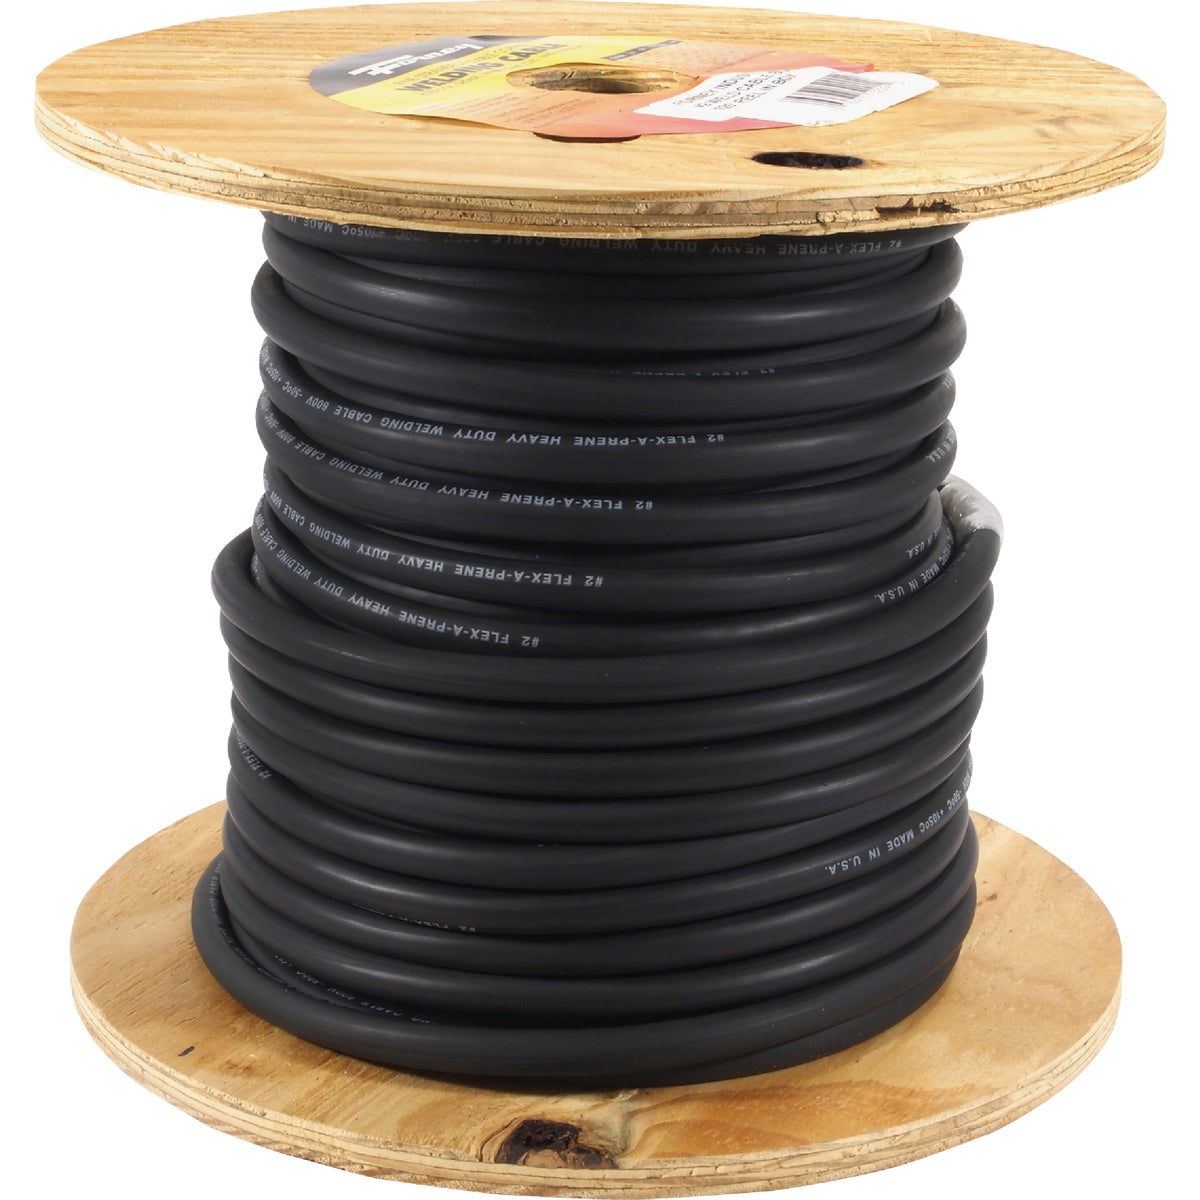 Forney 2-Gauge Welding Cable (125 Ft. Spool)